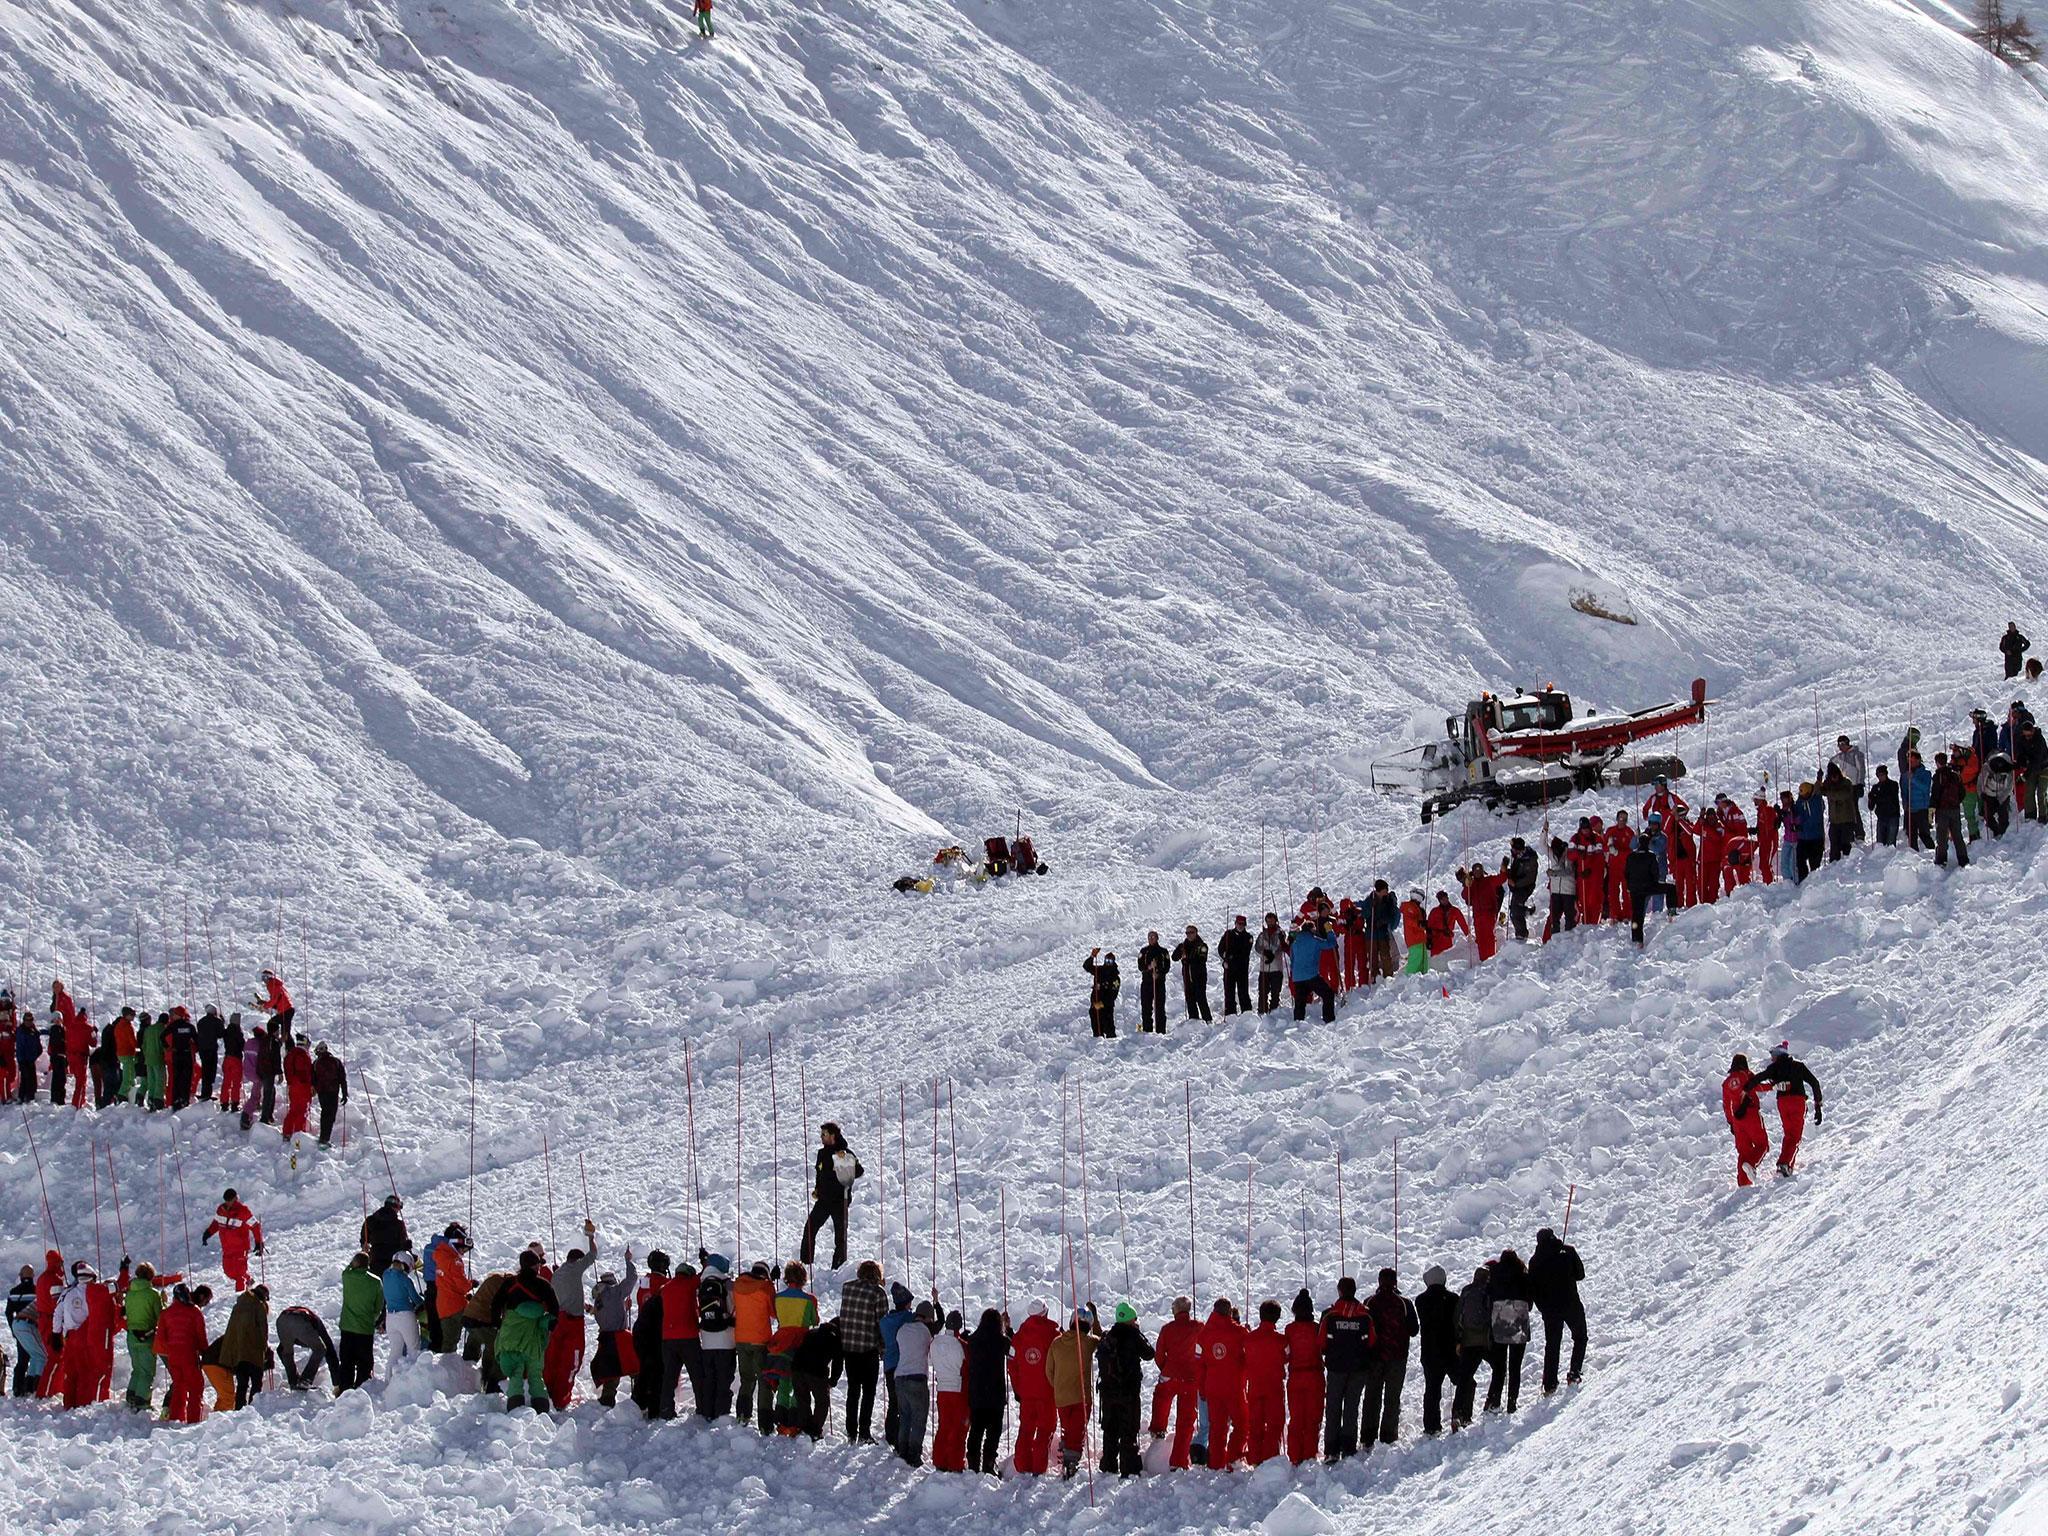 Rescuers workers search an avalanche site in an off-piste area (AFP/Getty Images)